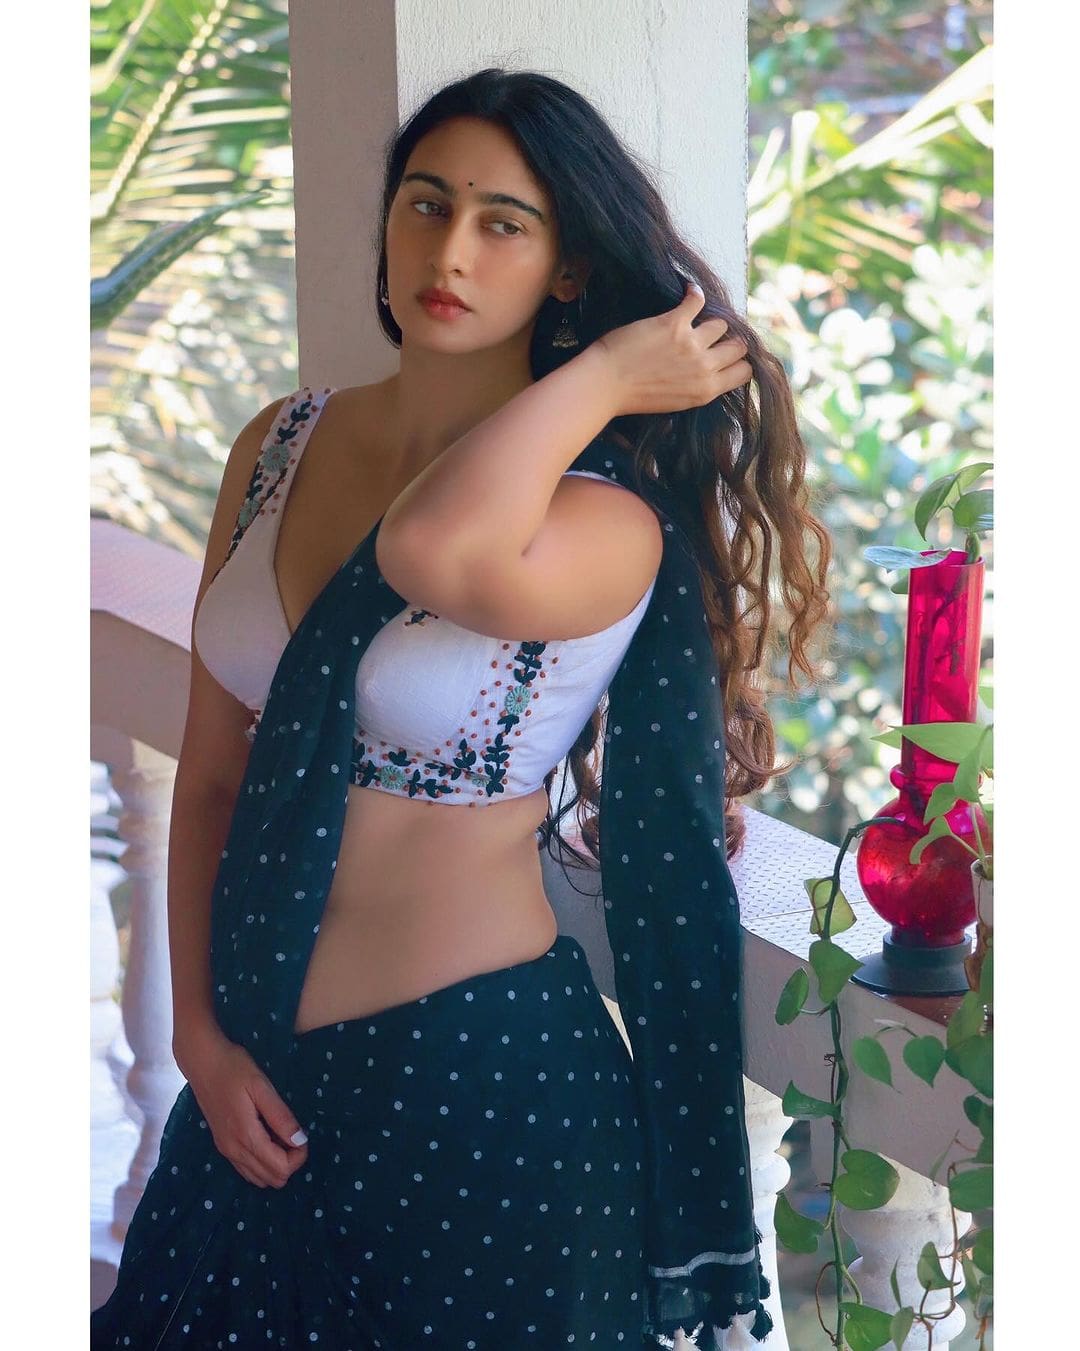 Megha Shukla sizzles on Instagram in a White Backless Blouse with a Plunging Neckline and Green Saree